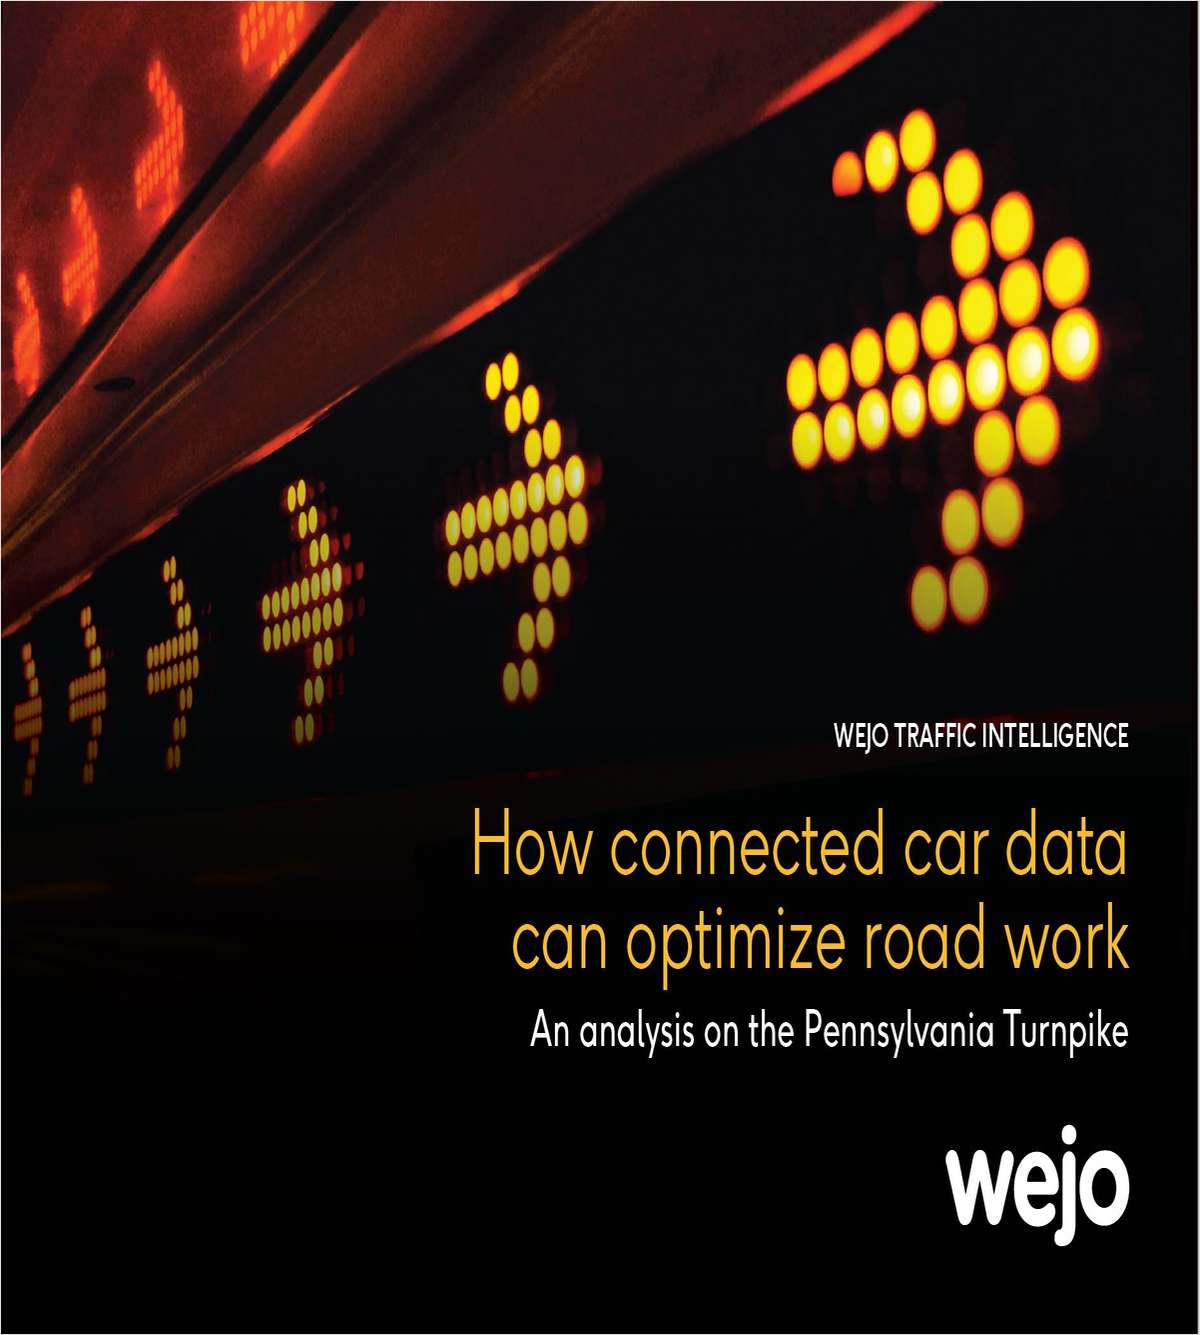 How Connected Car Data Can Optimize Road Work